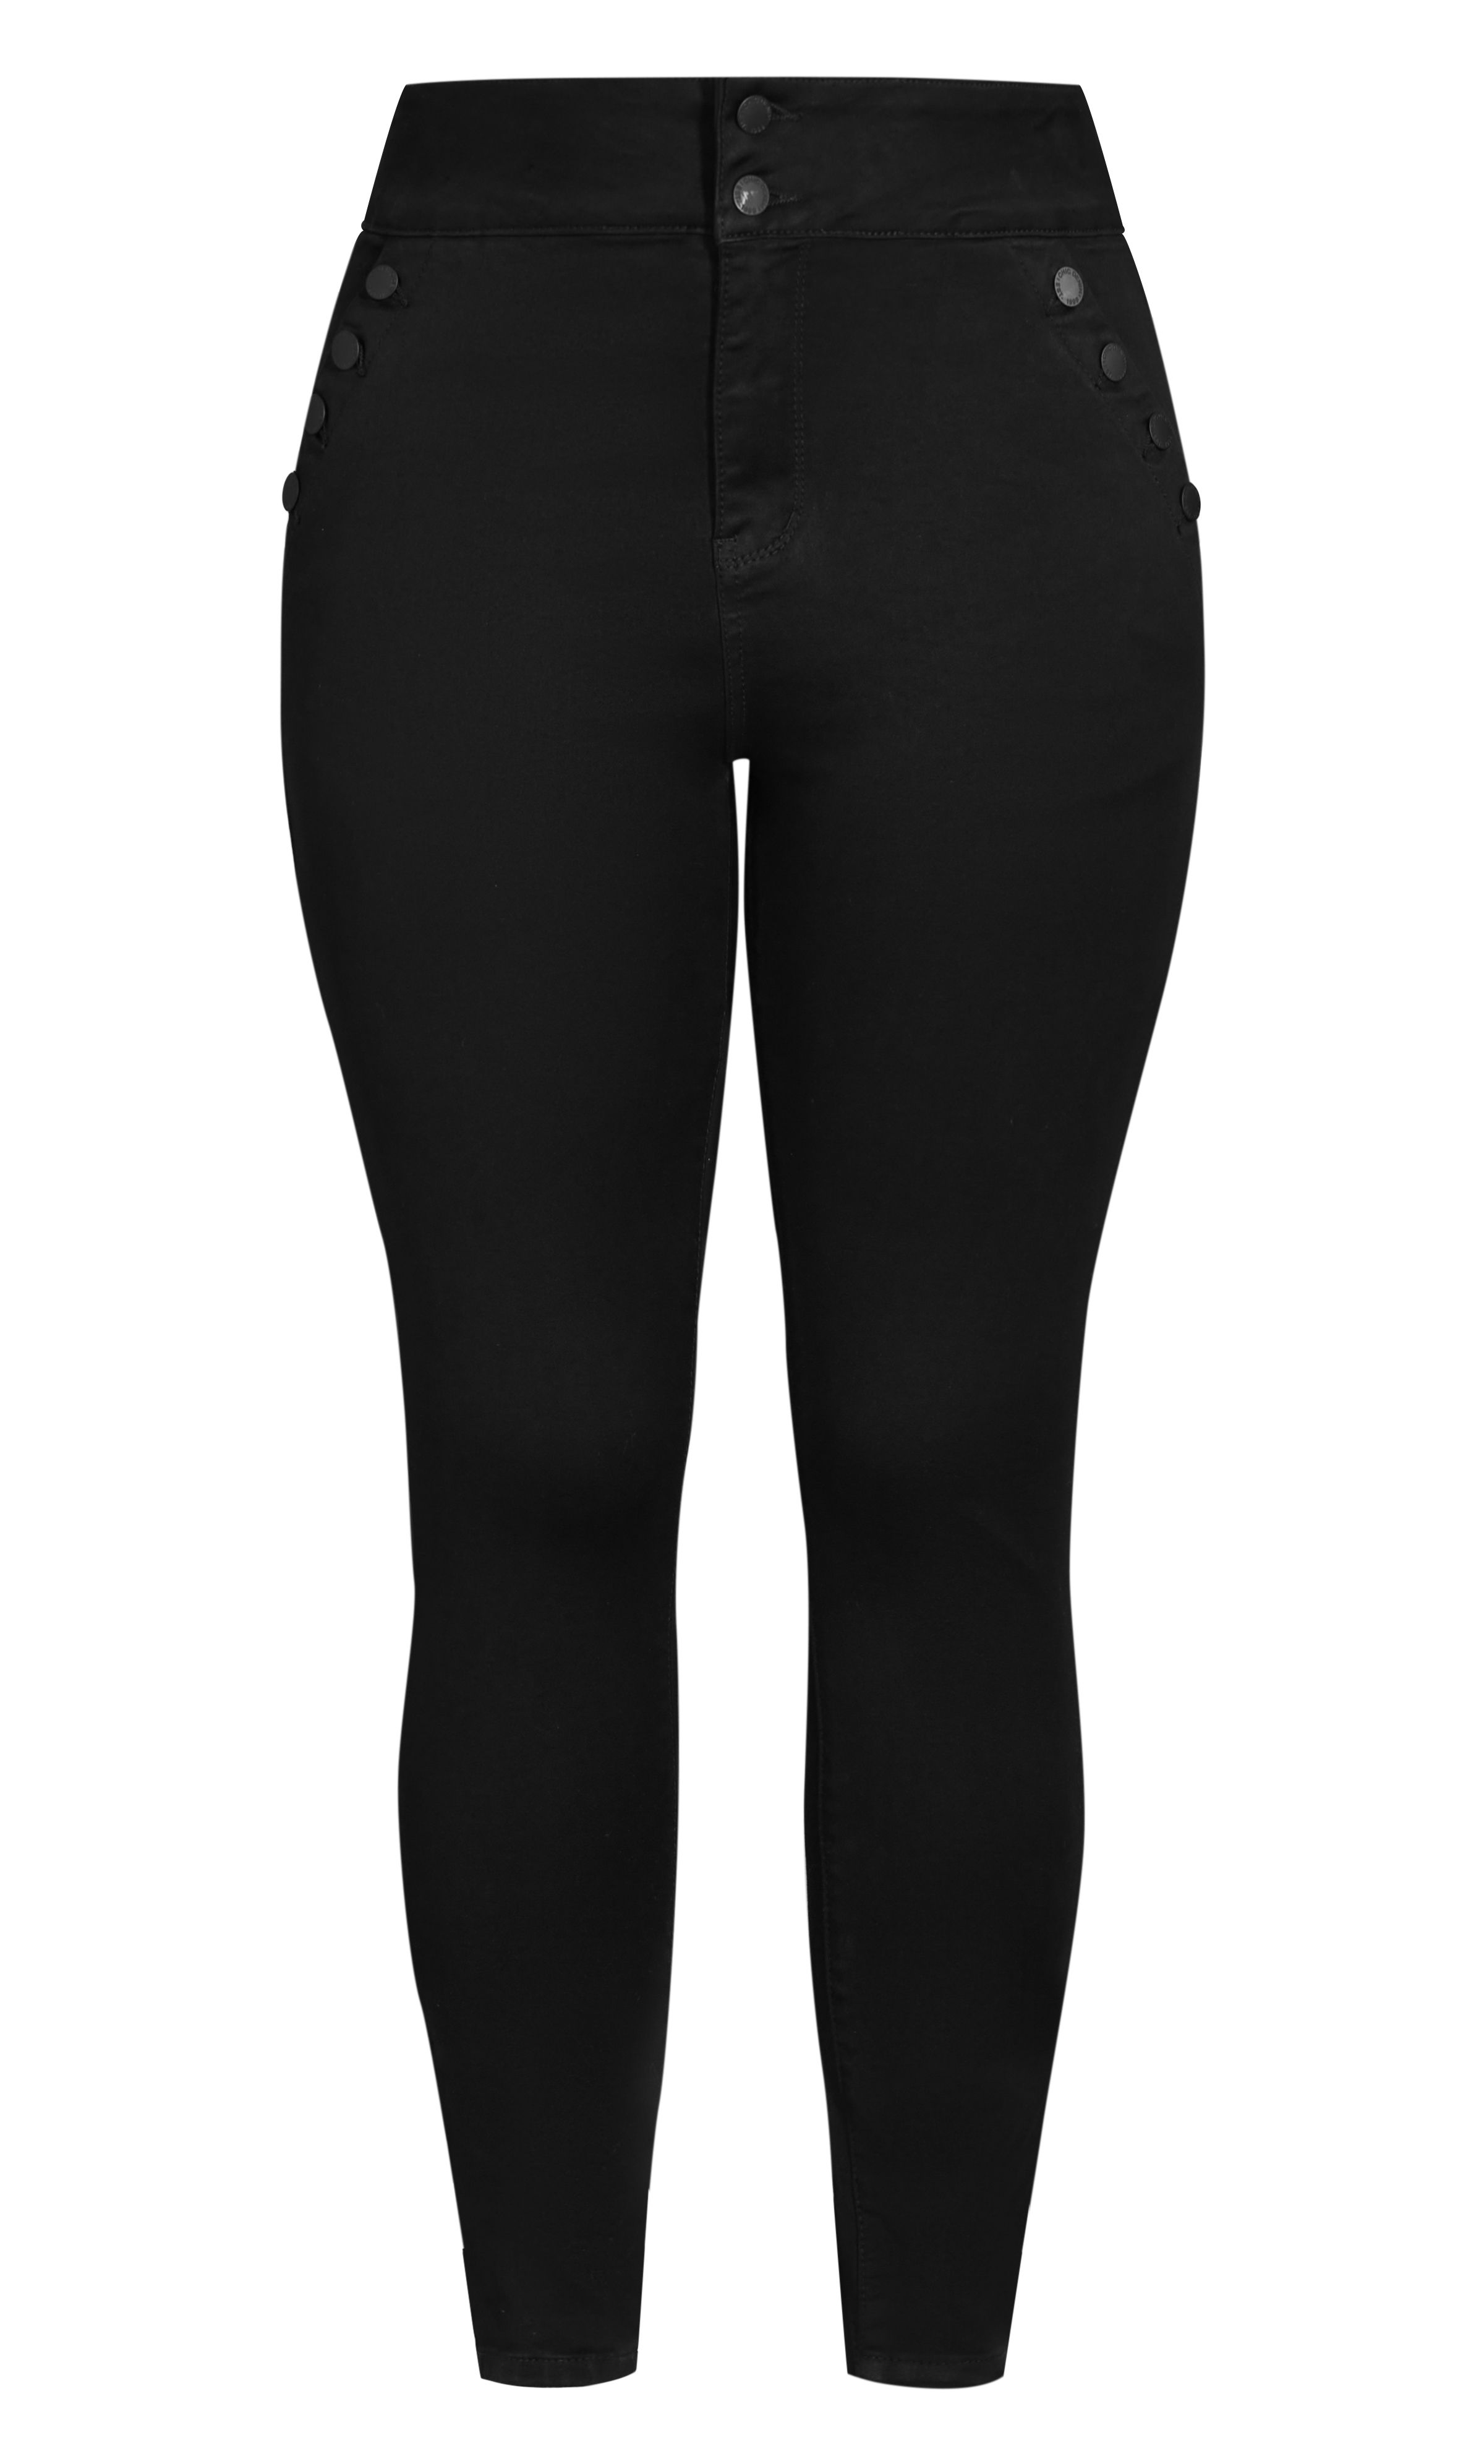 The Harley Buttoned Up Jean is a figure-hugging favourite for the new season, flaunting a high rise fit and practical stretch denim construction. With chic buttoned detailing to either side, these jeans know how to make a style statement! Key Features Include: - Harley: the perfect fit for an hourglass body shape - High rise - Double button & zip fly closure - Button detail - 4-pocket denim styling - Stretch cotton blend fabrication - Skinny leg - High denim fibre retention to maintain shape - Signature Chic Denim hardware throughout zips, buttons and rivets - Full length Level up your look with a cute sheer blouse and some patent pumps.